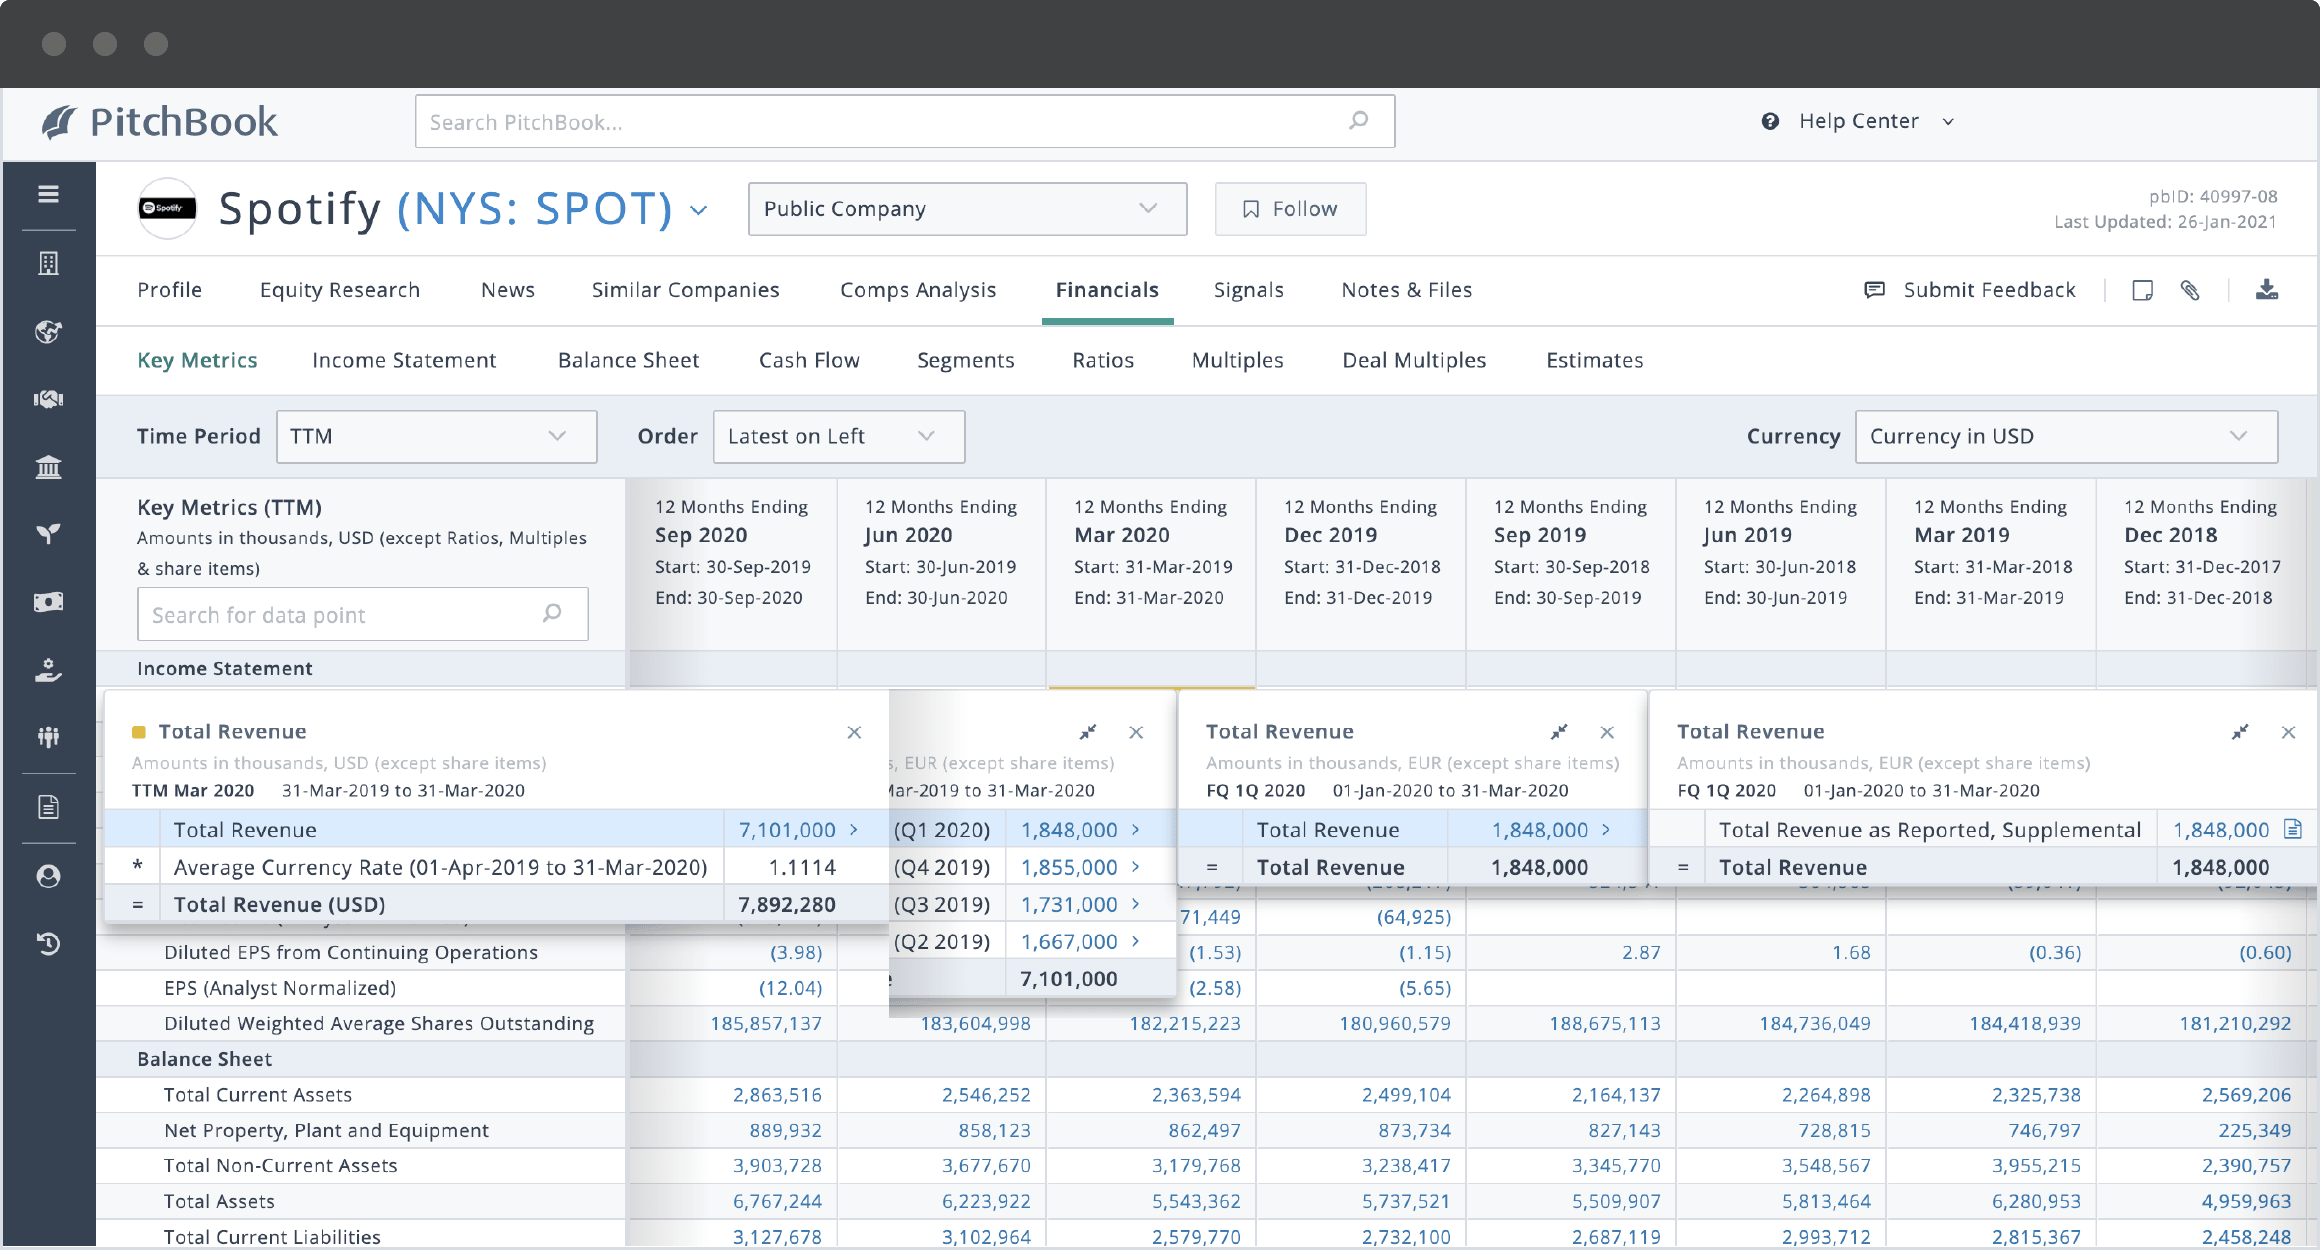 PitchBook financial data for Spotify, showing total revenue calculation metrics.